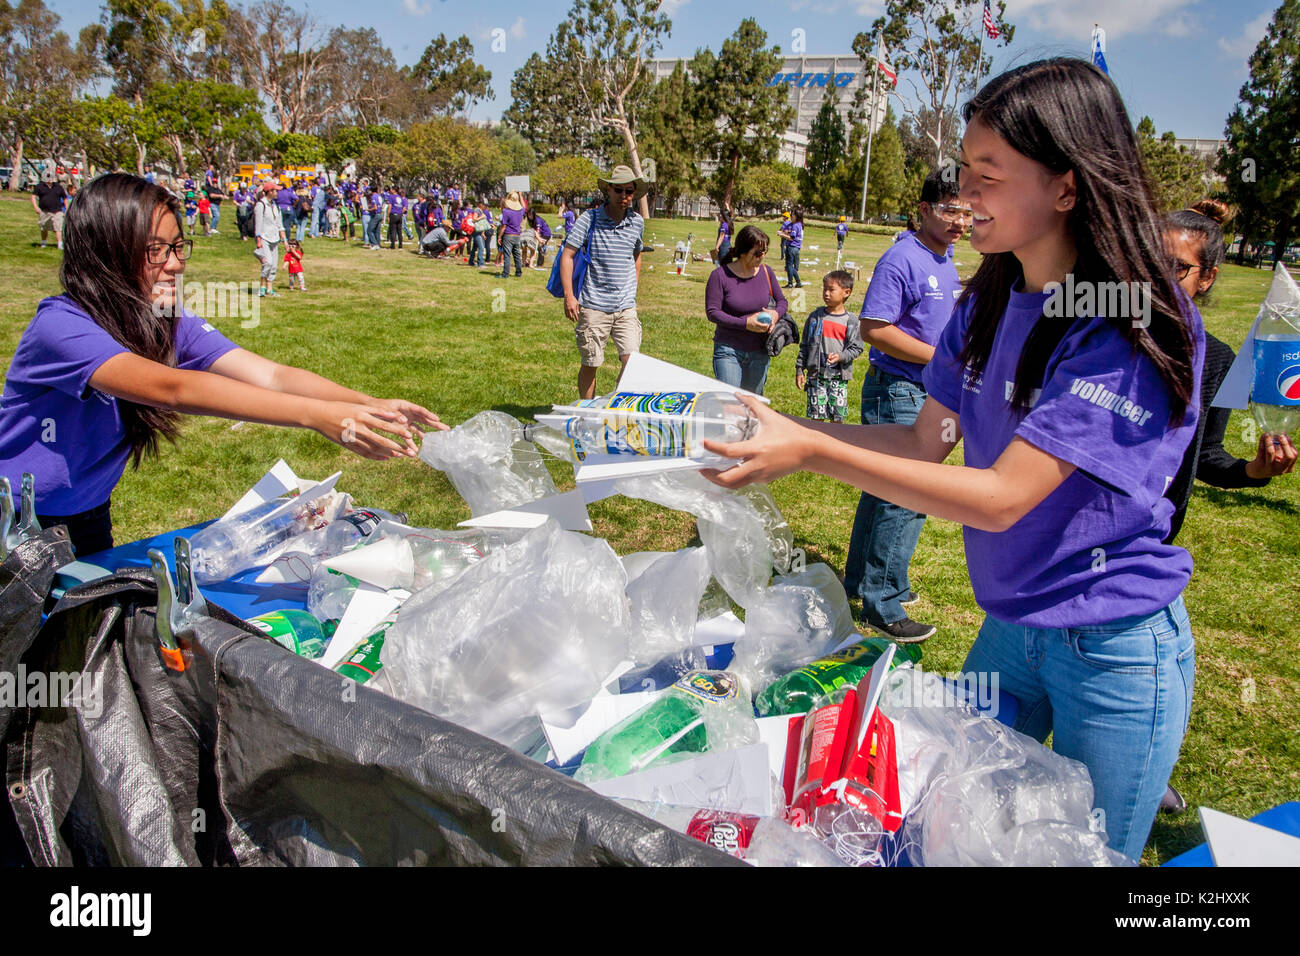 Wearing purple uniform T shirts, two Asian American young adult instructors collect expended water rockets at an outdoor rocket launching festival in Huntington Beach, CA. Made out of a plastic soda bottle, a water rocket uses water as its reaction mass. The water is forced out by compressed air. It operates on the principle of Newton's third law of motion Stock Photo